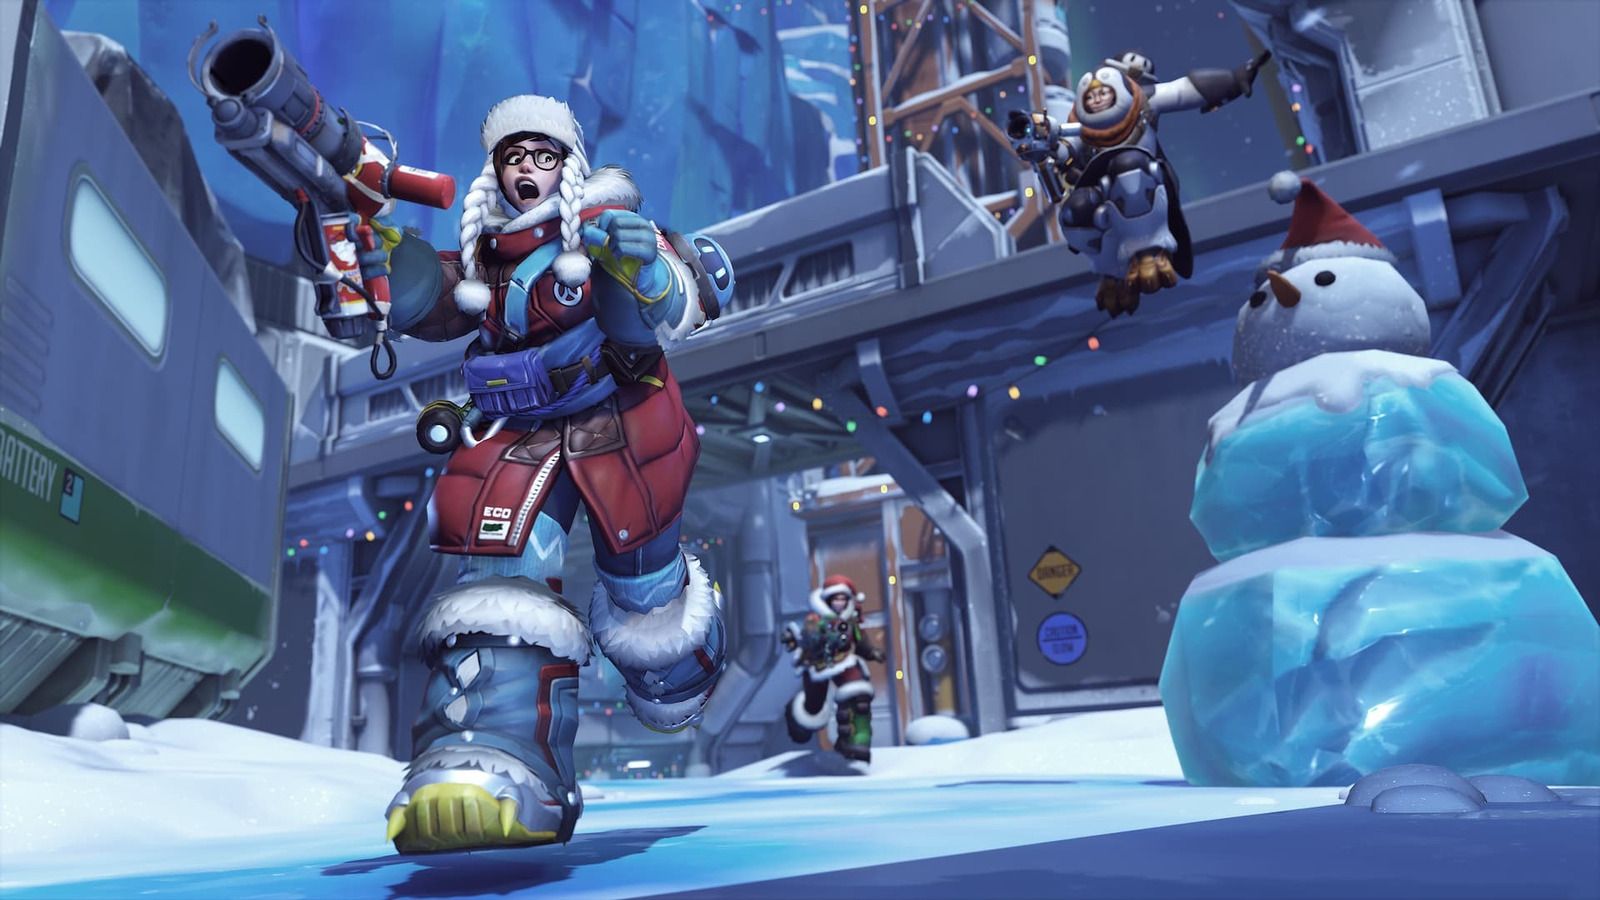 Overwatch 2 Meis in snowball fight